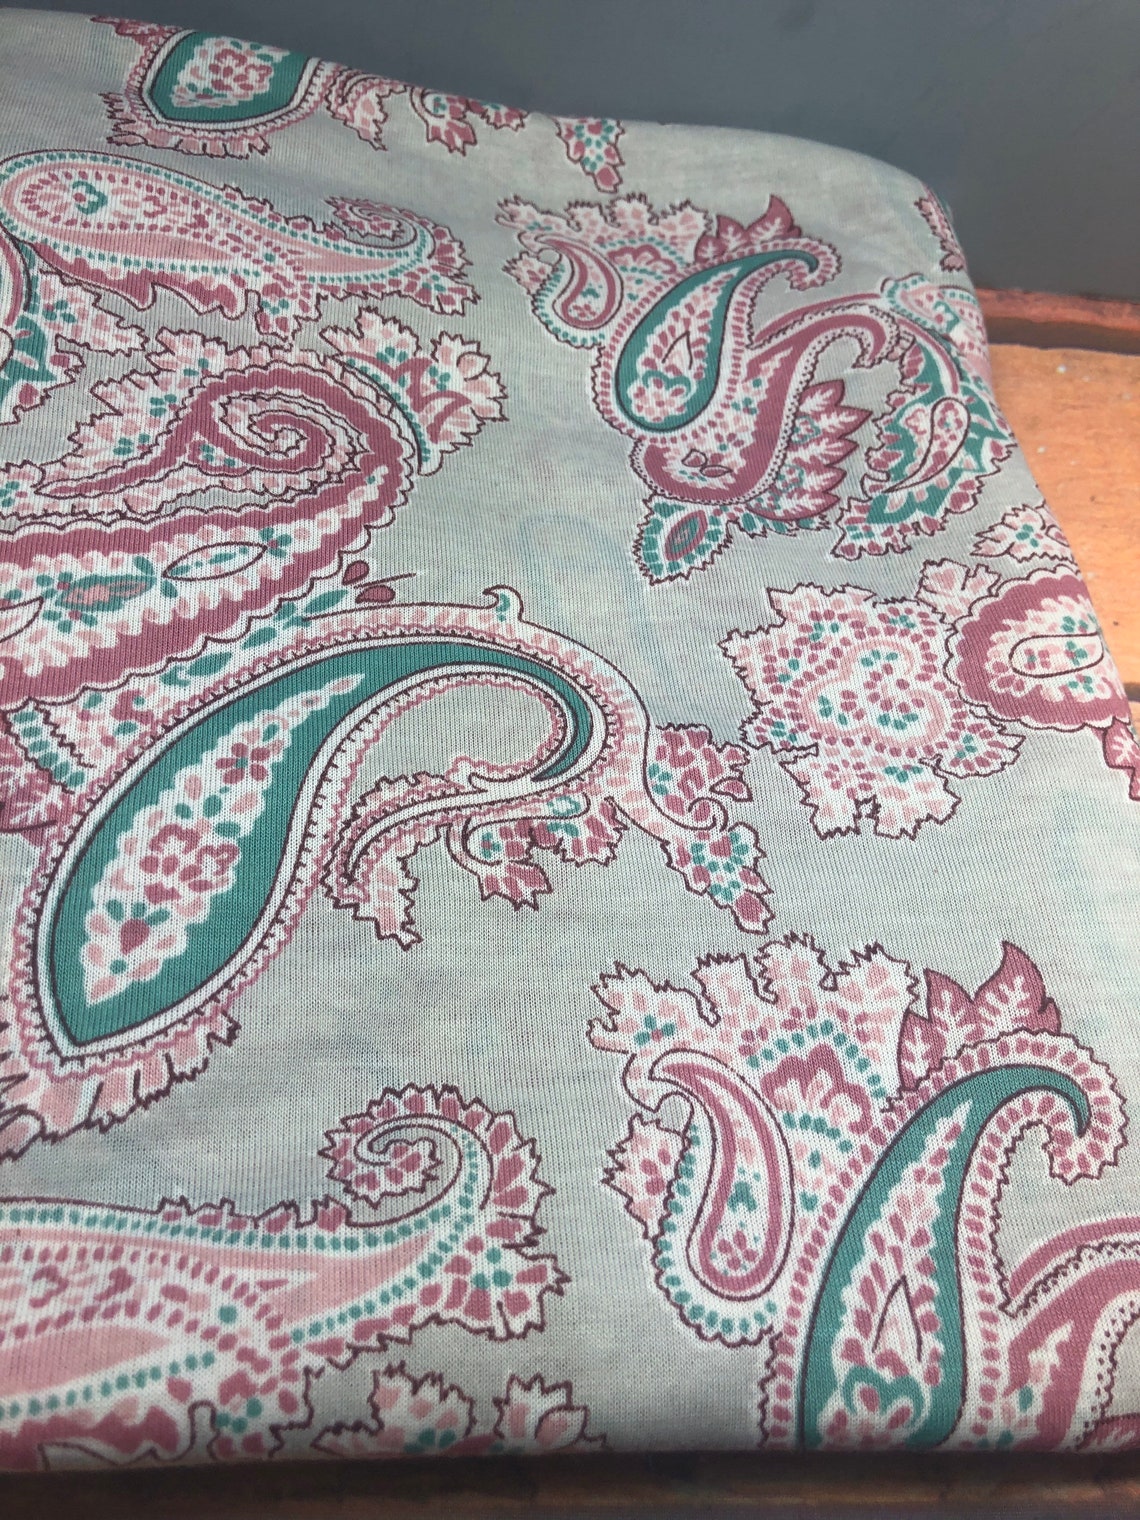 Polyester Blend Fabric Grey Green Pink Paisley 80 X 68 | Etsy